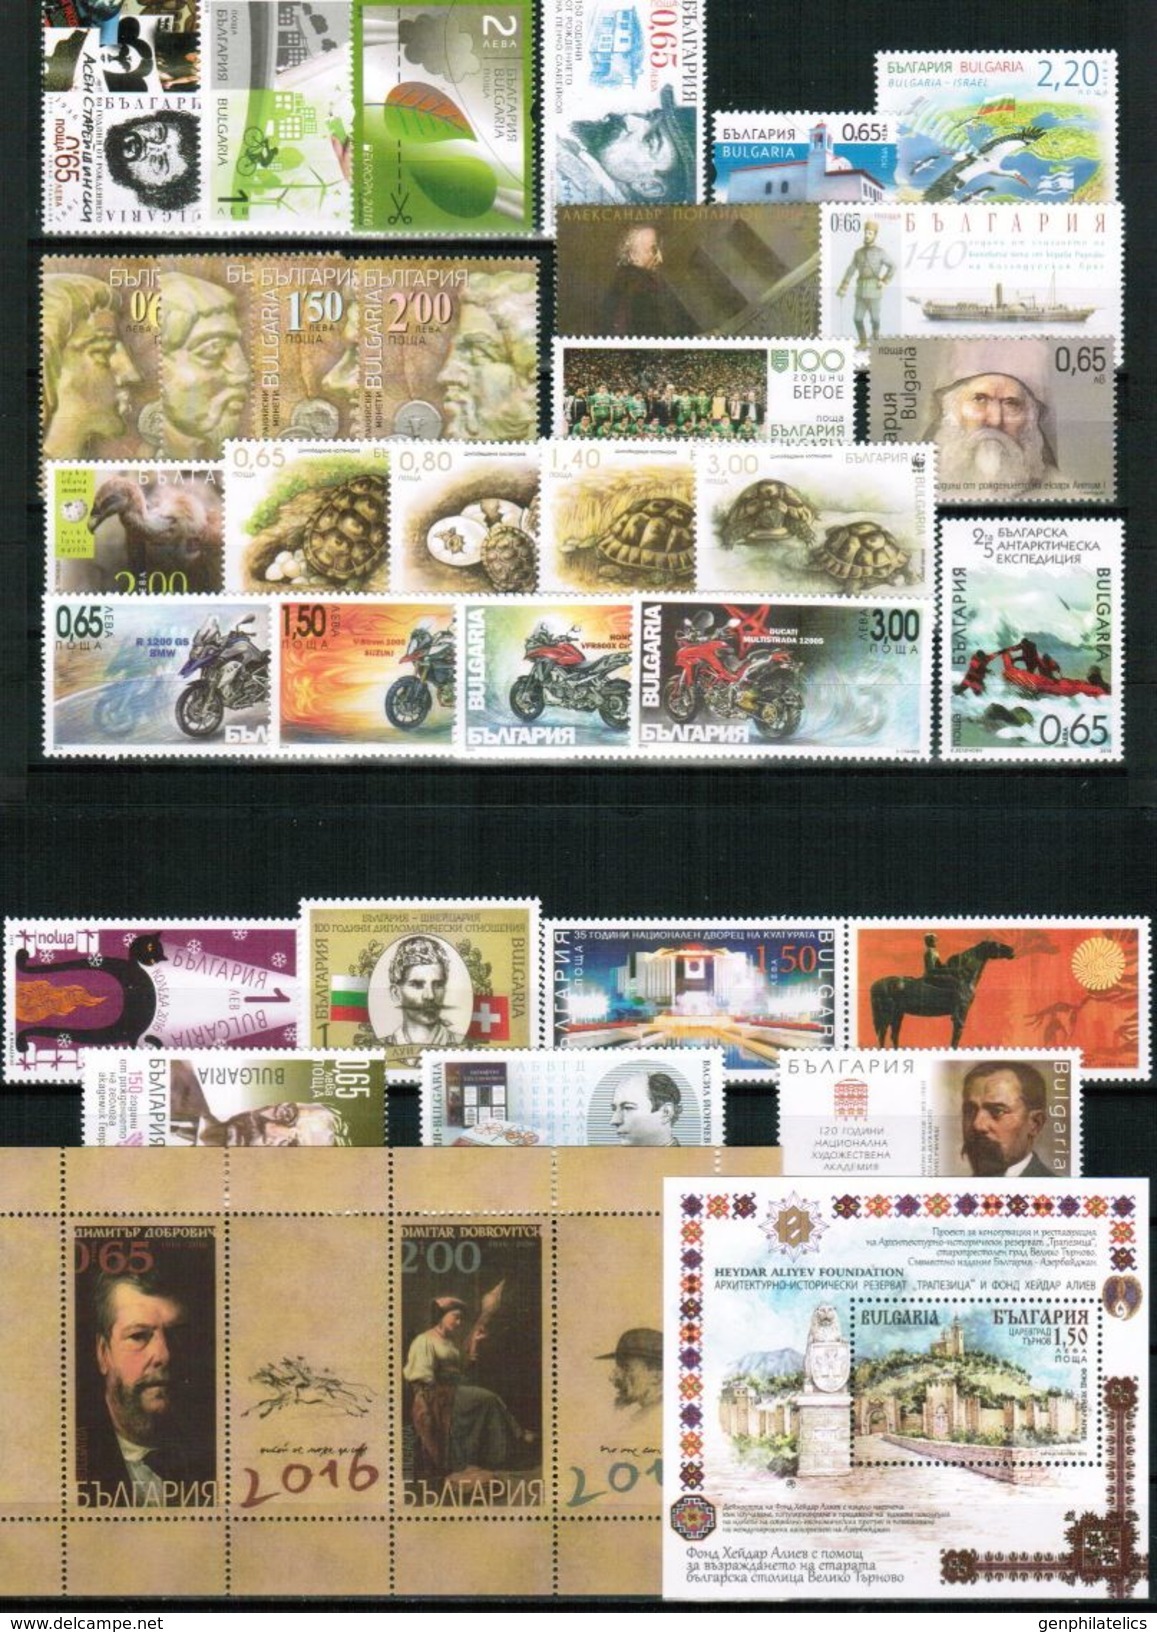 BULGARIA 2016 FULL YEAR SET - 26 Stamps + 8 S/S MNH - Années Complètes